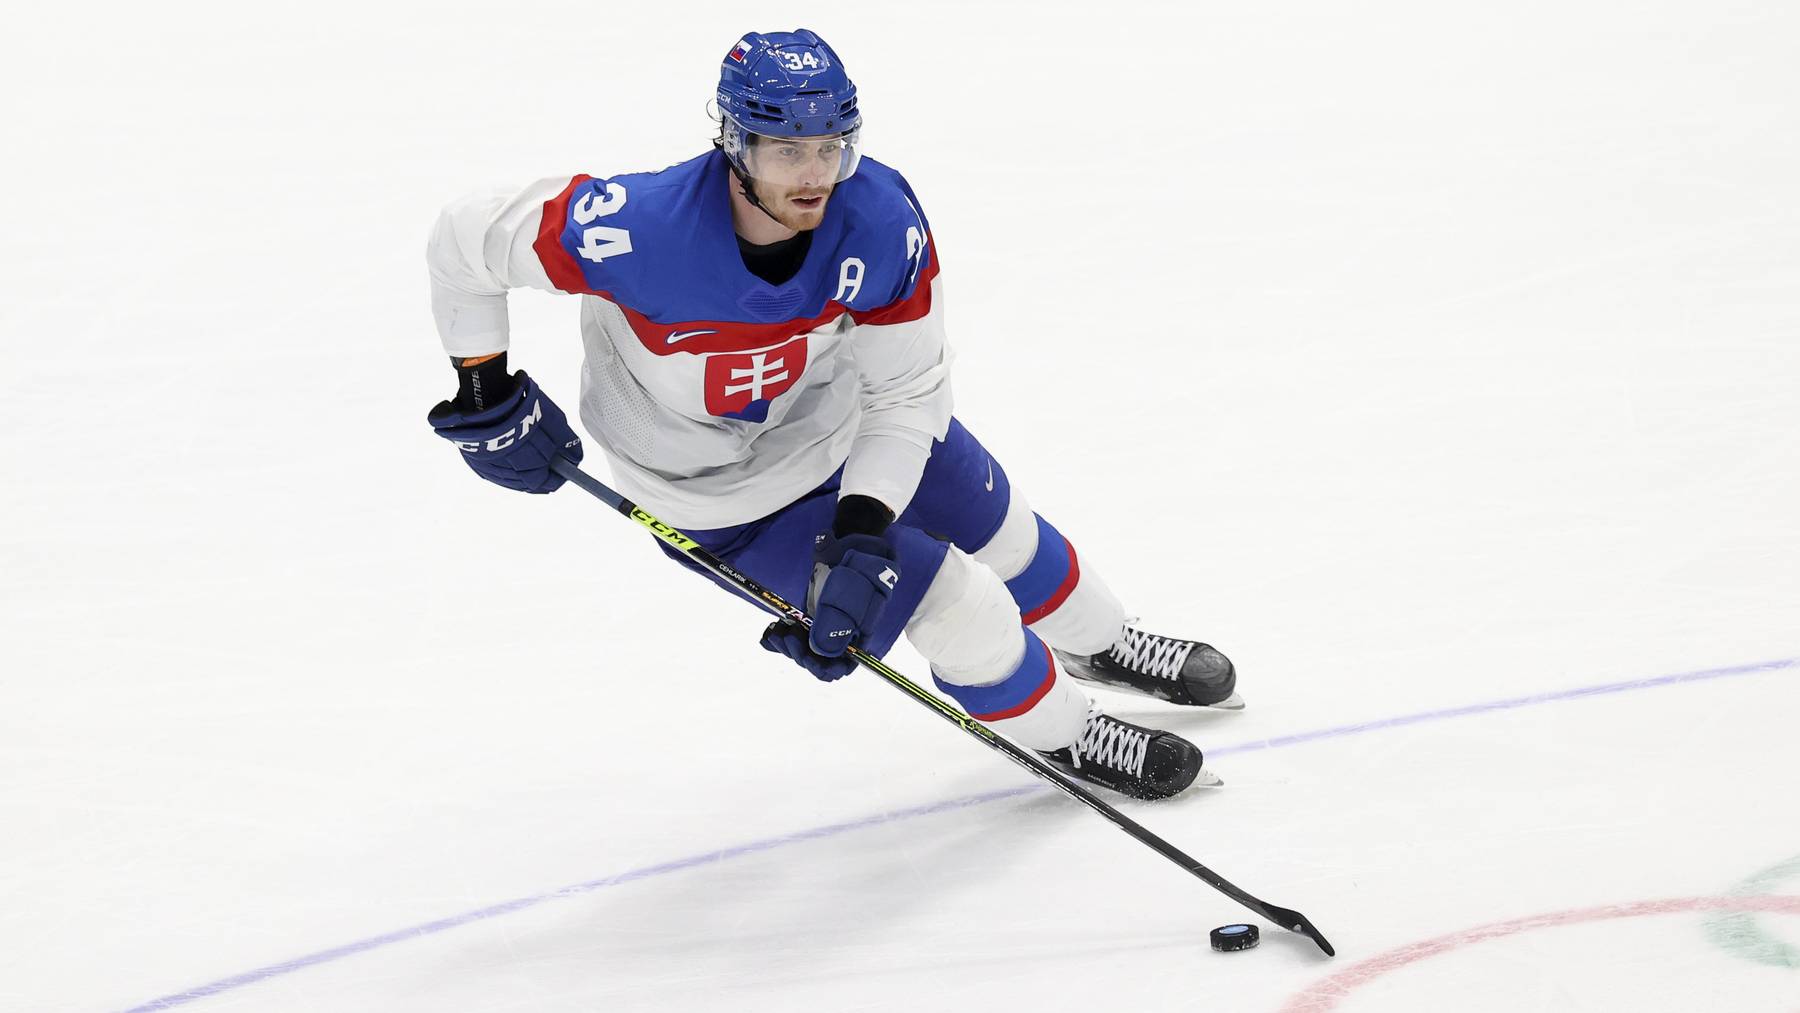 Peter Cehlarik of Slovakia during the Men's Ice Hockey Playoff Semifinal match between Team Finland and Team Slovakia on Day 14 of the Beijing 2022 Winter Olympic Games at National Indoor Stadium on February 18, 2022 in Beijing, China.